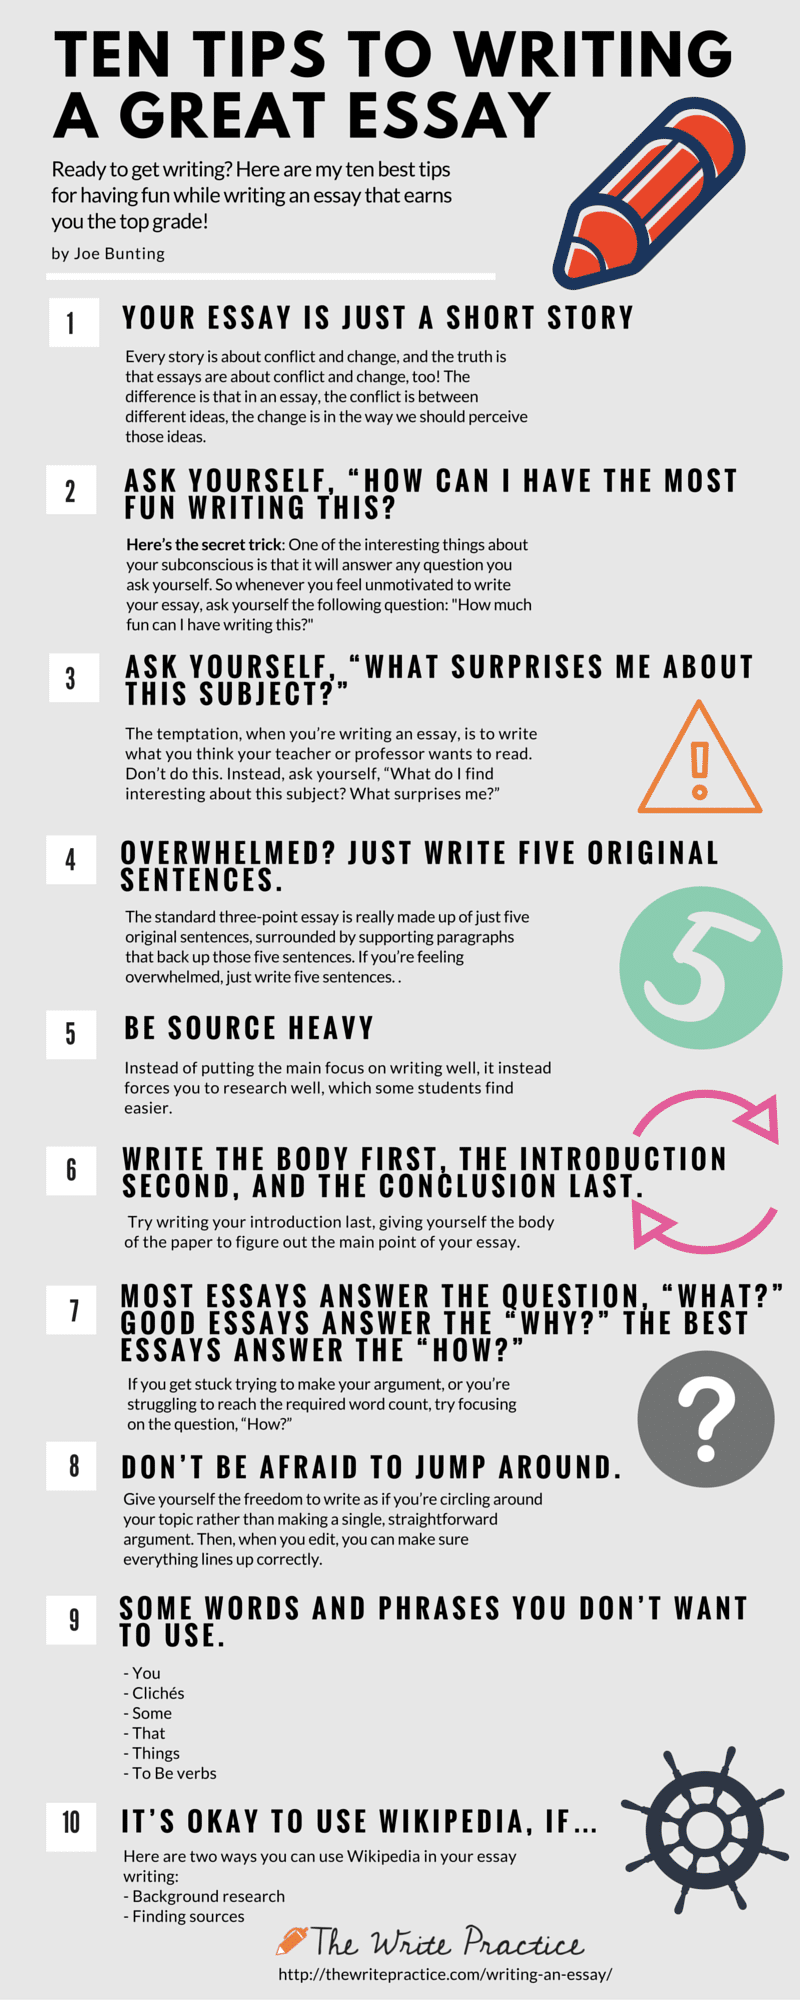 7 Techniques from Creative Writing You Can Use to Improve Your Essays - Oxford Royale Academy